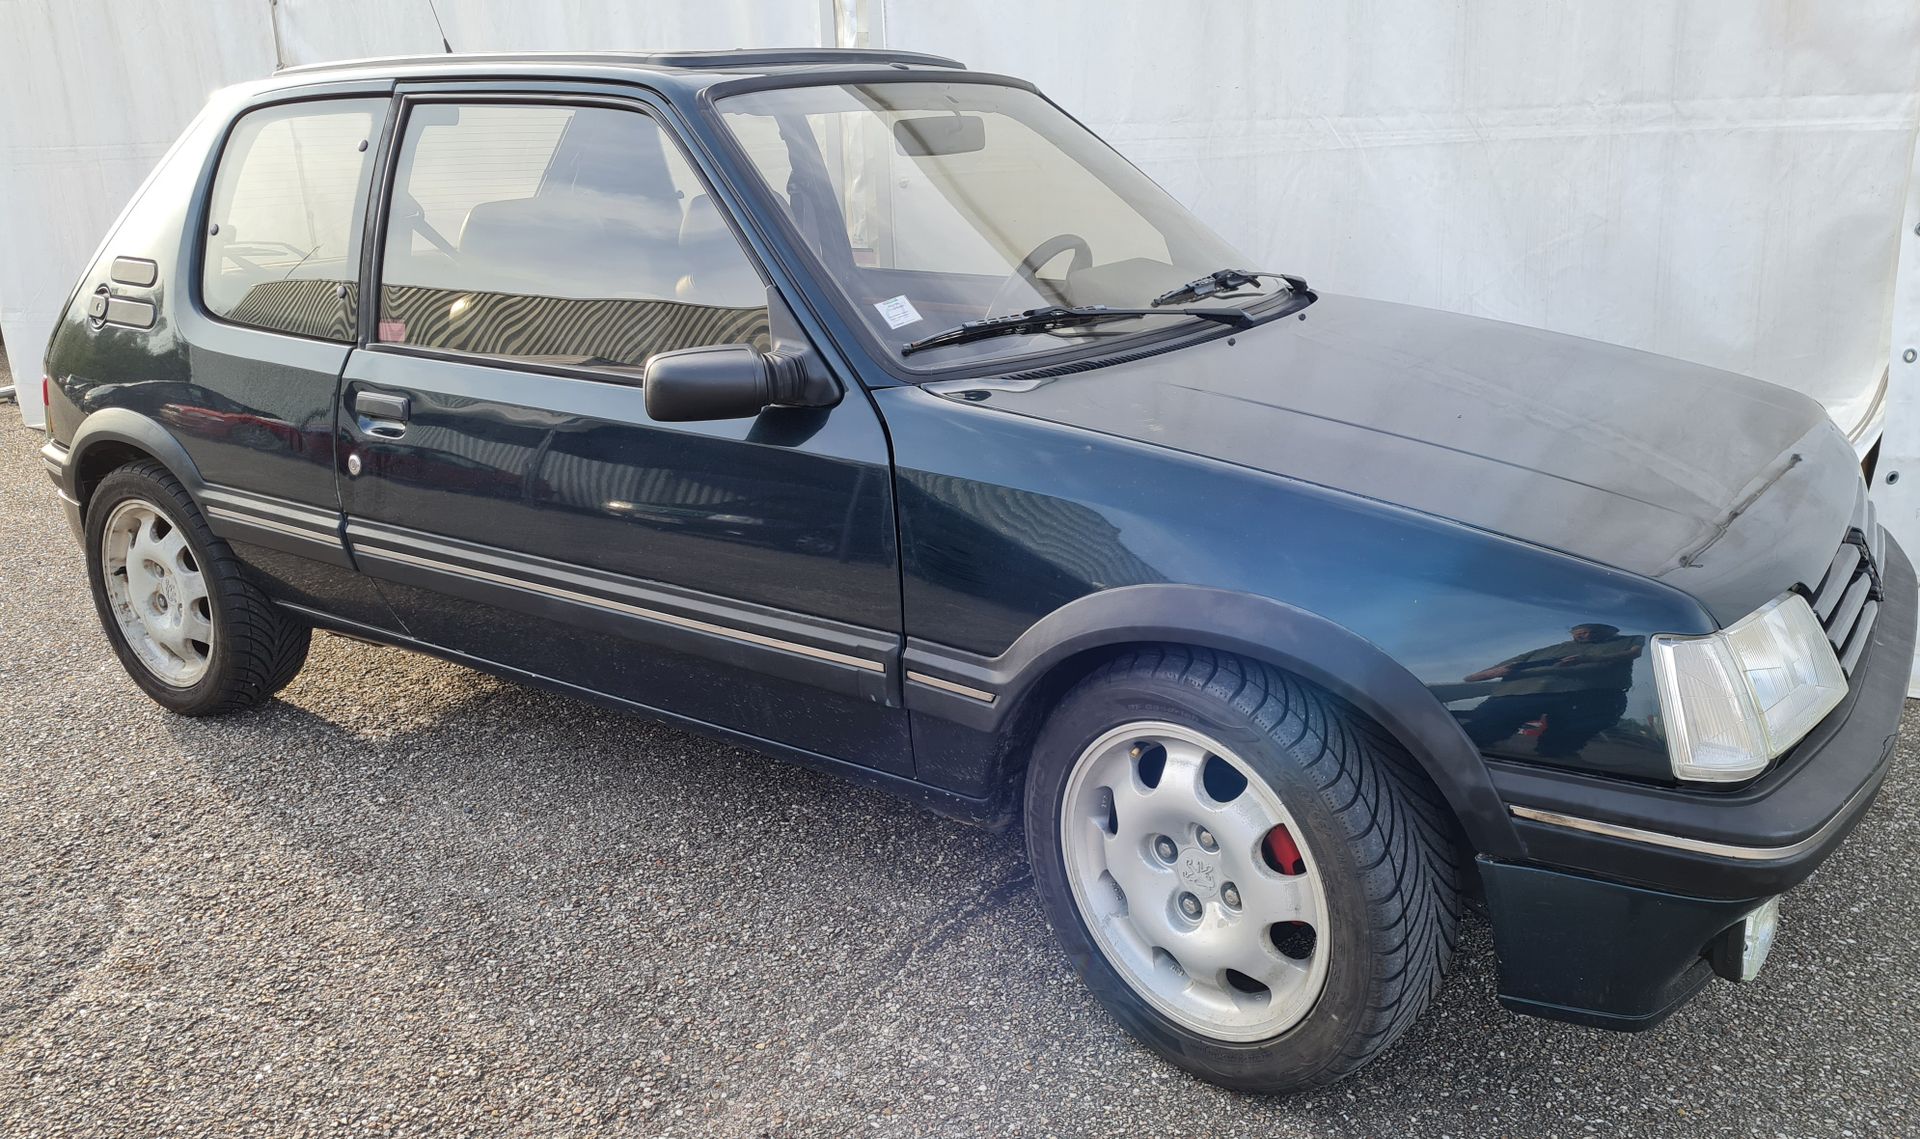 Null PEUGEOT 205 GTI GENTRY 1,9 l - Injections



PEUGEOT, Modele 205, Immatricu&hellip;